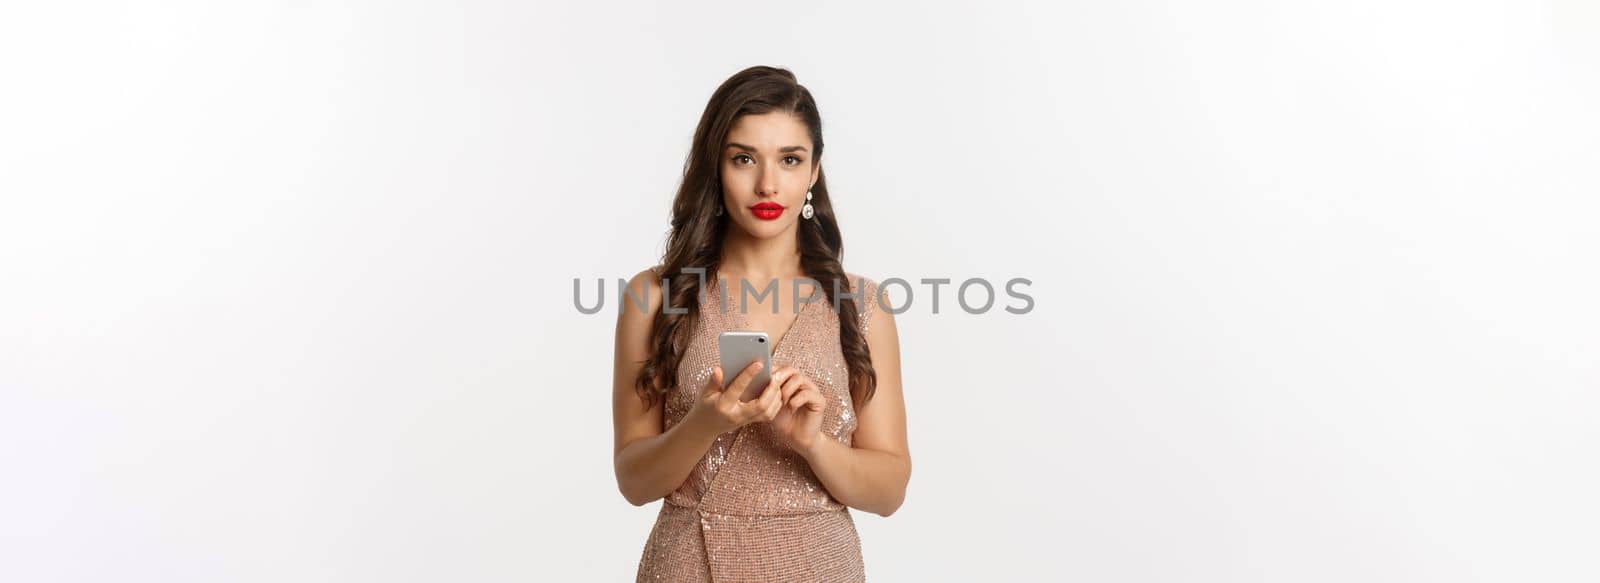 Christmas party and celebration concept. Attractive woman in luxurious dress making phone call, texting message on smartphone, standing over white background.